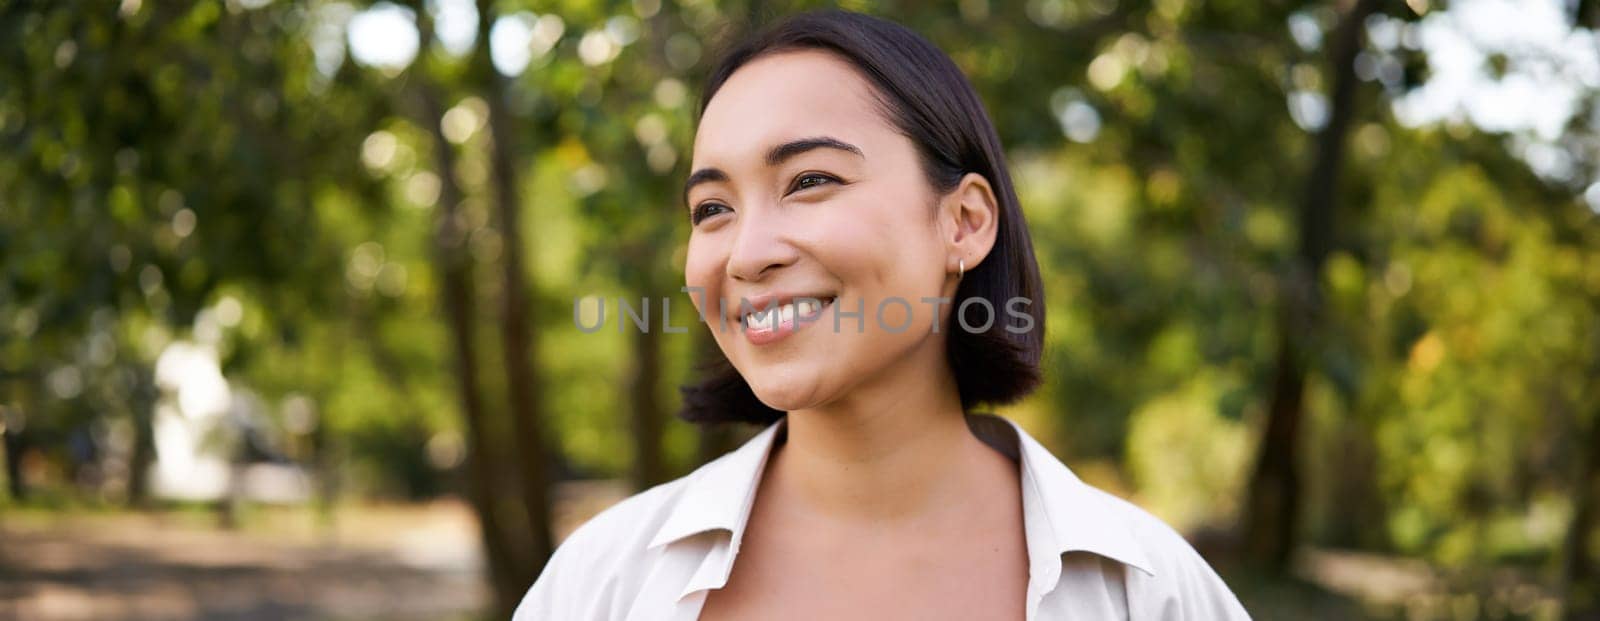 People concept. Smiling asian girl looking at camera with happy, joyful emotion, posing in green park on a warm summer day.